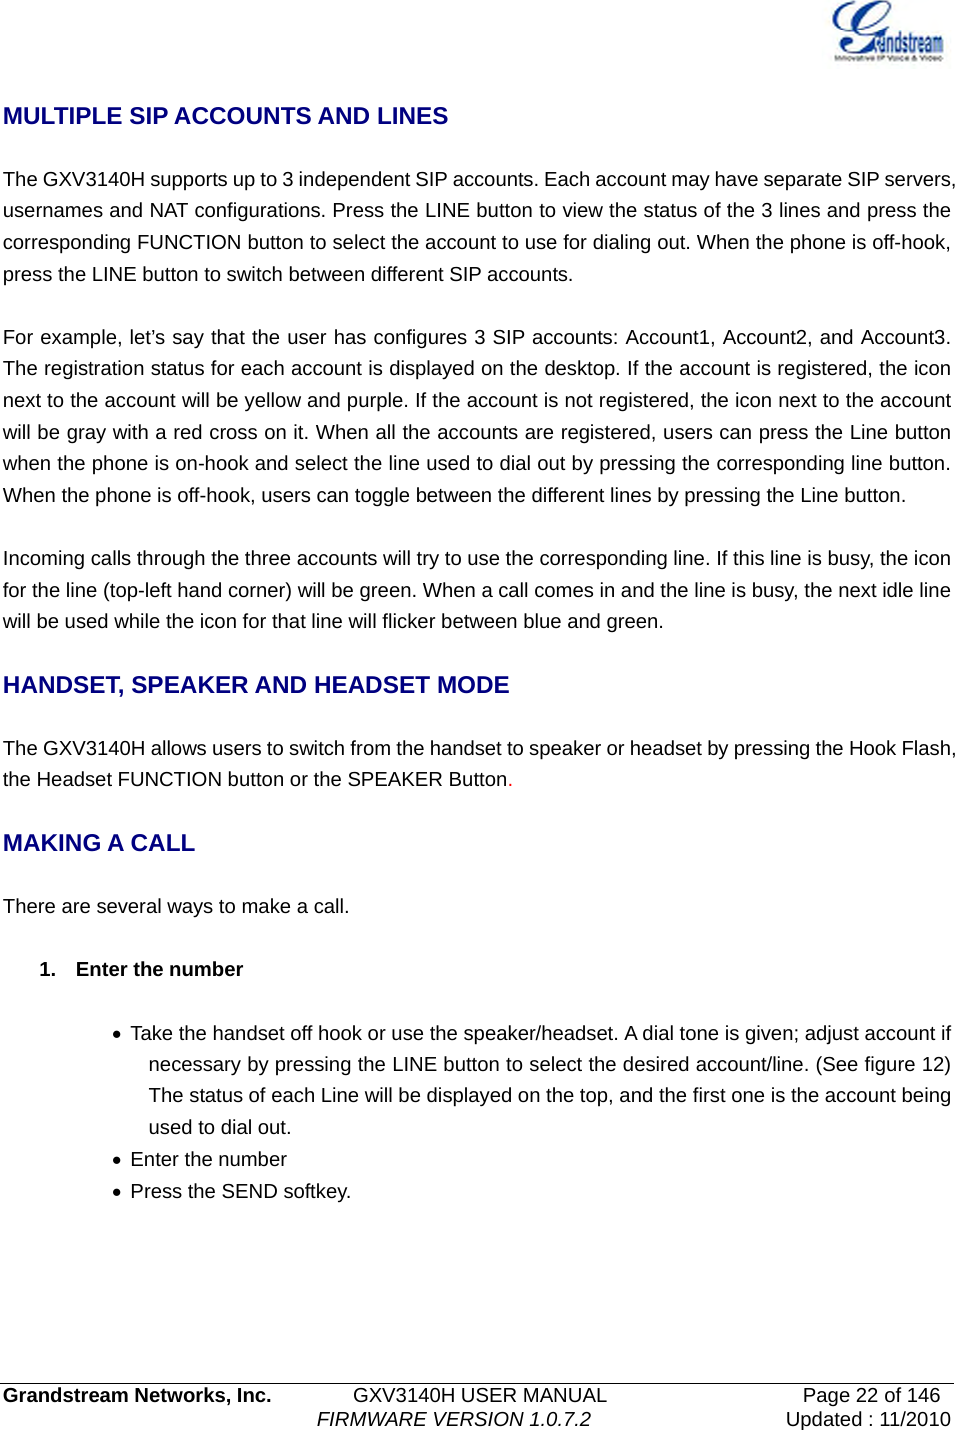   Grandstream Networks, Inc.        GXV3140H USER MANUAL                  Page 22 of 146                                FIRMWARE VERSION 1.0.7.2 Updated : 11/2010   MULTIPLE SIP ACCOUNTS AND LINES  The GXV3140H supports up to 3 independent SIP accounts. Each account may have separate SIP servers, usernames and NAT configurations. Press the LINE button to view the status of the 3 lines and press the corresponding FUNCTION button to select the account to use for dialing out. When the phone is off-hook, press the LINE button to switch between different SIP accounts.  For example, let’s say that the user has configures 3 SIP accounts: Account1, Account2, and Account3. The registration status for each account is displayed on the desktop. If the account is registered, the icon next to the account will be yellow and purple. If the account is not registered, the icon next to the account will be gray with a red cross on it. When all the accounts are registered, users can press the Line button when the phone is on-hook and select the line used to dial out by pressing the corresponding line button. When the phone is off-hook, users can toggle between the different lines by pressing the Line button.      Incoming calls through the three accounts will try to use the corresponding line. If this line is busy, the icon for the line (top-left hand corner) will be green. When a call comes in and the line is busy, the next idle line will be used while the icon for that line will flicker between blue and green.    HANDSET, SPEAKER AND HEADSET MODE  The GXV3140H allows users to switch from the handset to speaker or headset by pressing the Hook Flash, the Headset FUNCTION button or the SPEAKER Button.  MAKING A CALL  There are several ways to make a call.  1. Enter the number  •  Take the handset off hook or use the speaker/headset. A dial tone is given; adjust account if necessary by pressing the LINE button to select the desired account/line. (See figure 12) The status of each Line will be displayed on the top, and the first one is the account being used to dial out.   • Enter the number •  Press the SEND softkey. 